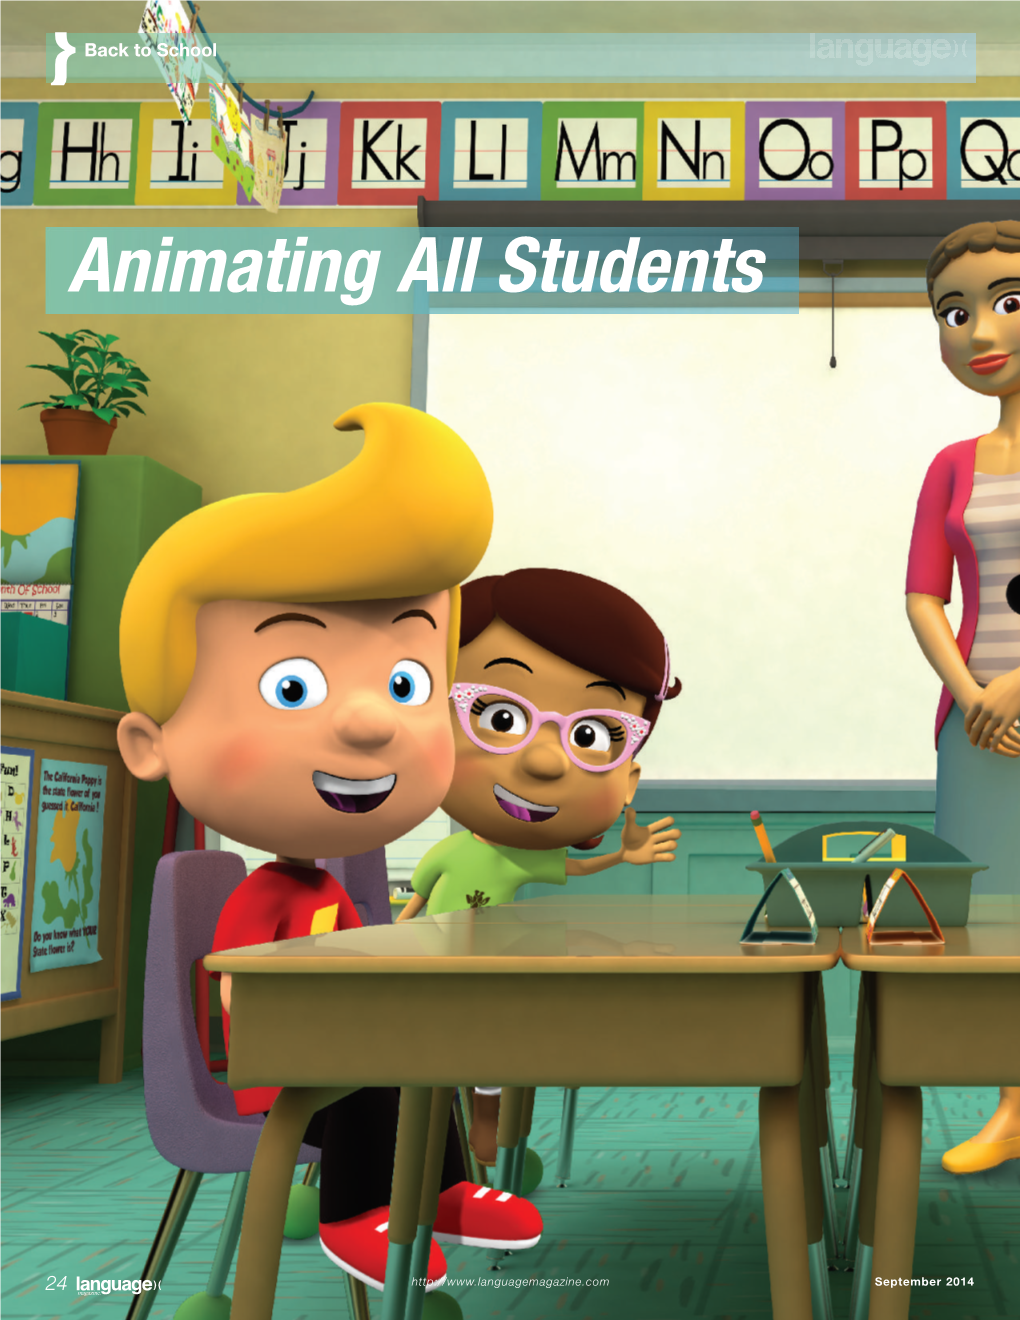 Animating All Students